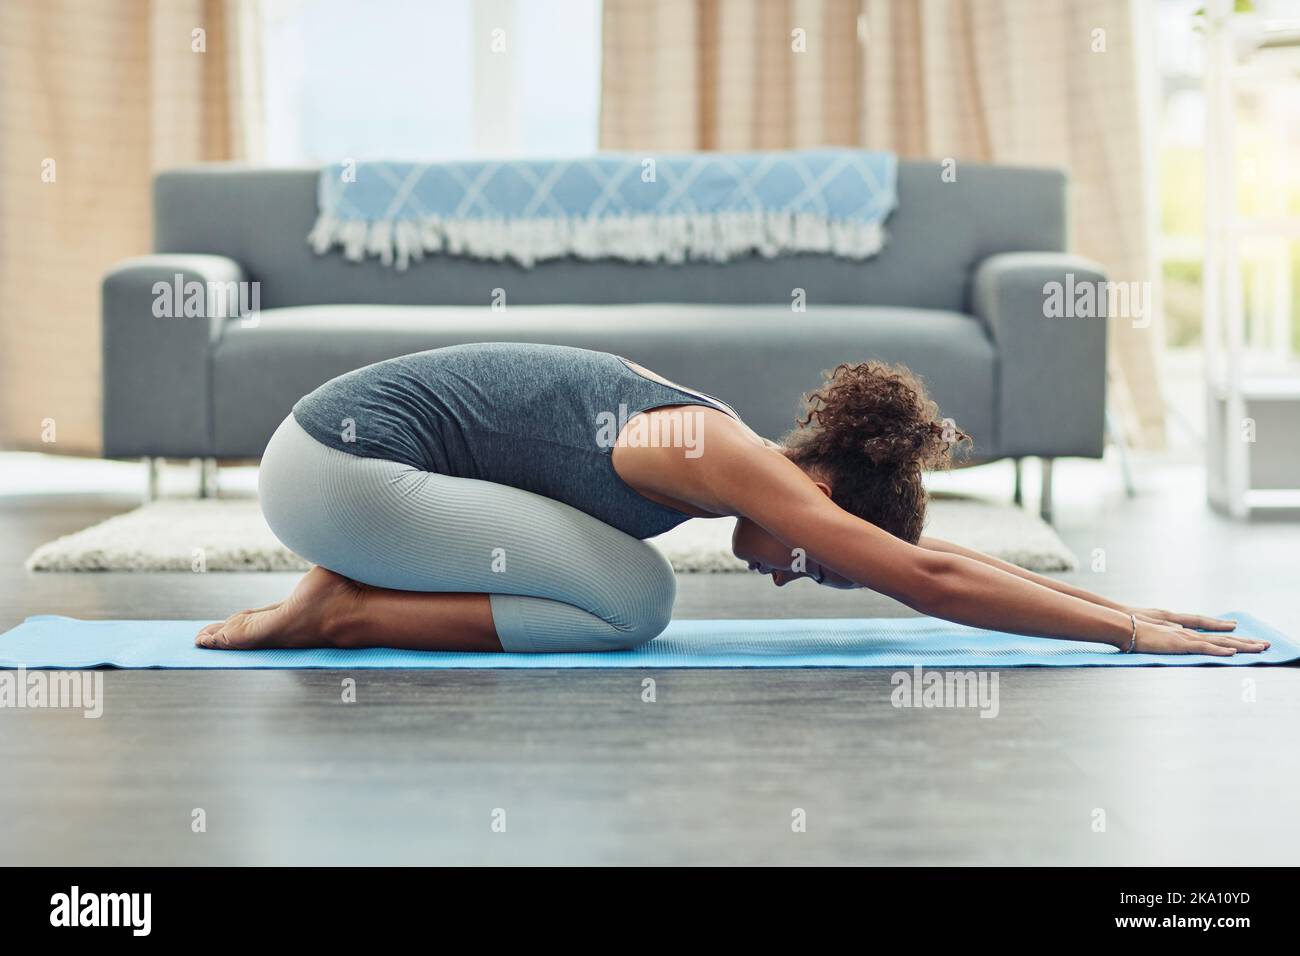 Breathing is important in yoga. an attractive young woman practicing yoga at home. Stock Photo